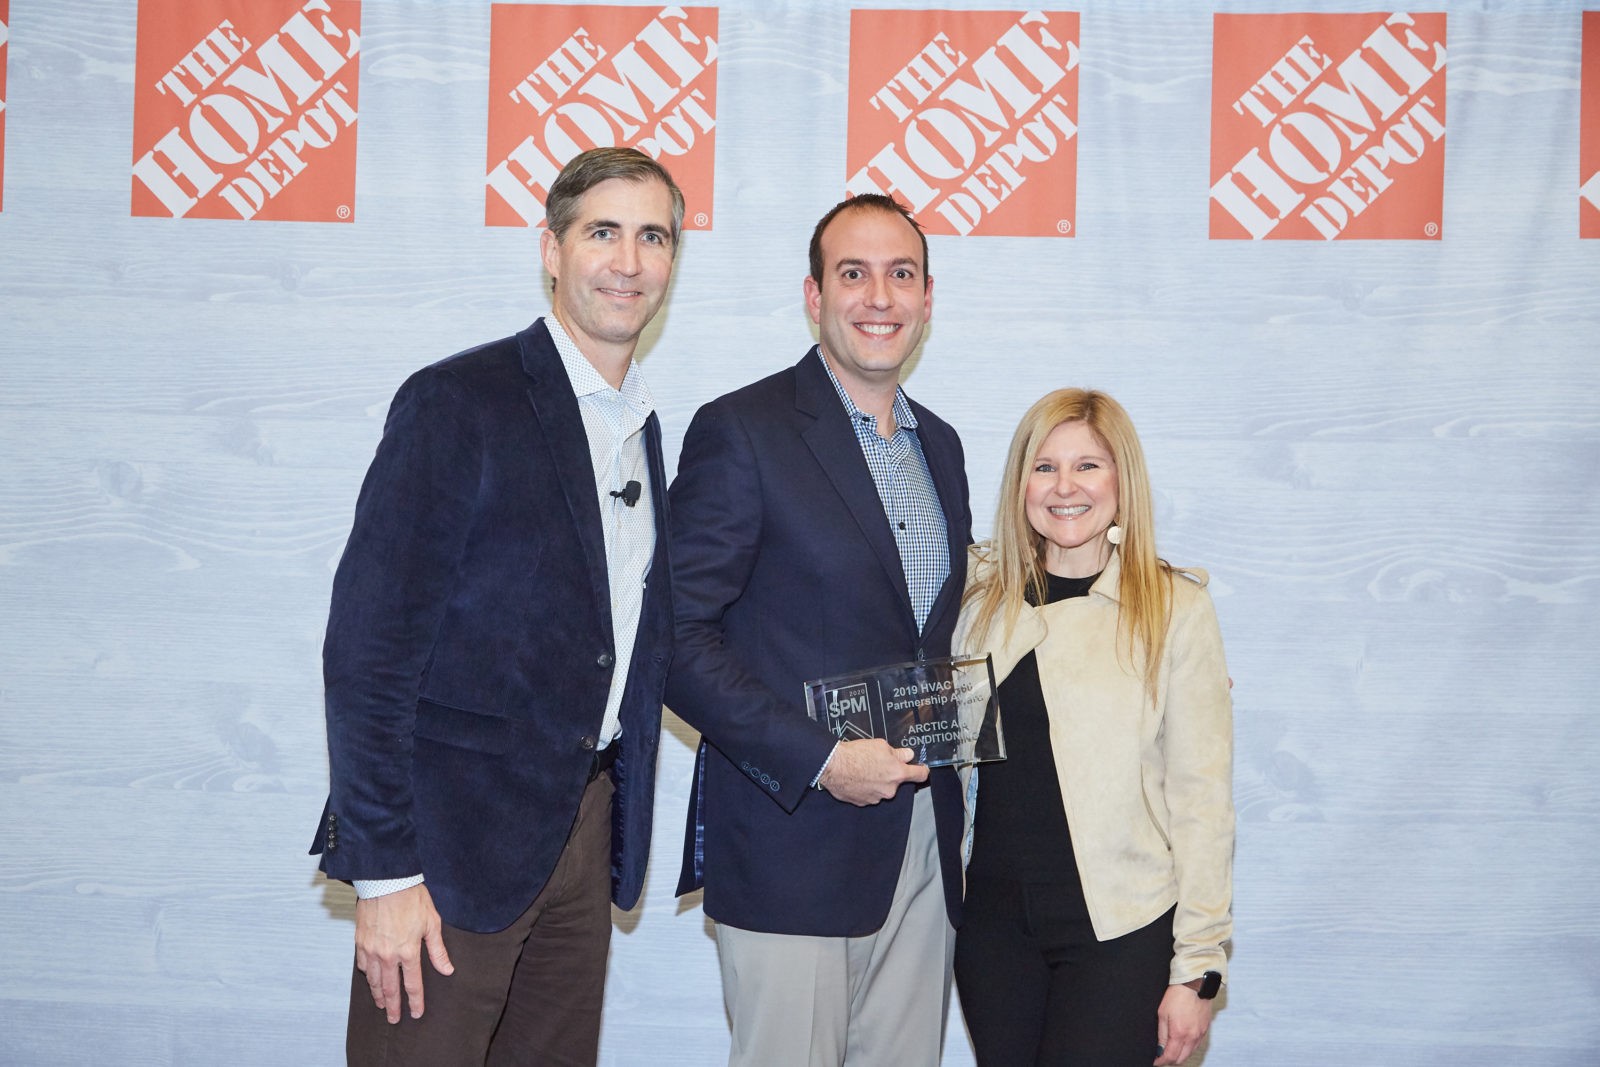 Members of Arctic AC team proudly accepting the 2018 Home Depot HVAC Service Provider of the Year award.